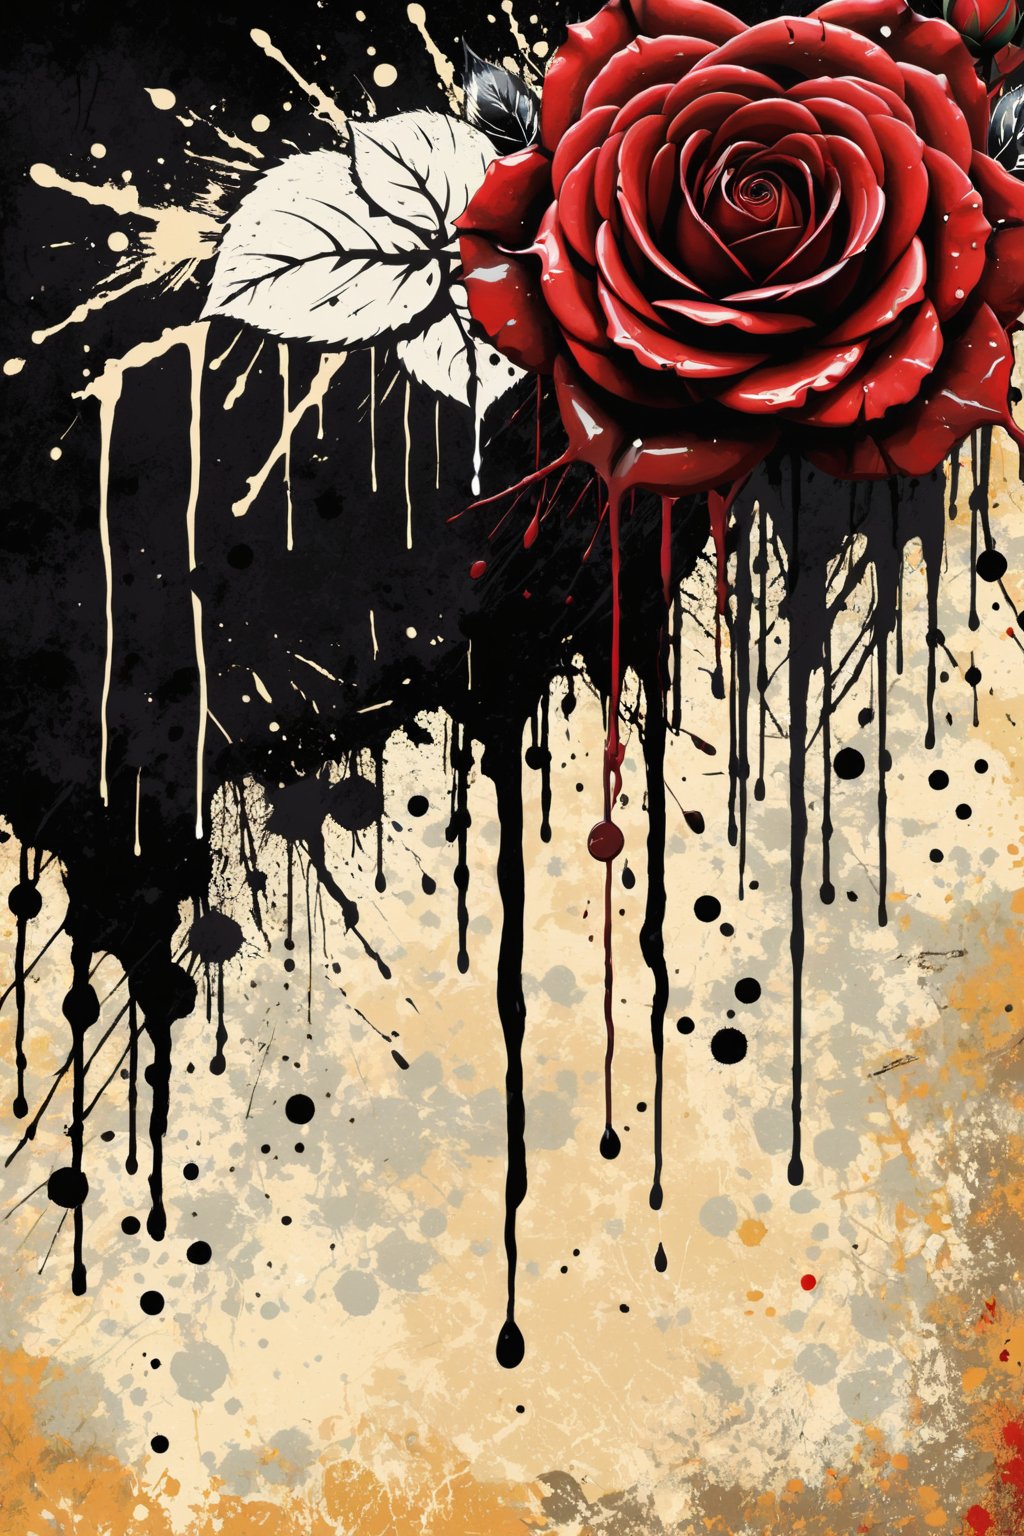 (An amazing and captivating abstract illustration:1.4), english text, text focus, cover, album cover, (black rose:1.2), black stains, (dripping white paint:1.1), (grunge style:1.4), (colorful and minimalistic:1.3), (2004 aesthetics:1.2),(beautiful vector shapes:1.3), with (the text "GRUNGE":1.4), text block. BREAK (red background:1.3), (red theme:1.1), sharp details. BREAK highest quality, detailed and intricate, original artwork, trendy, no humans, vintage, award-winning, artint, SFW,